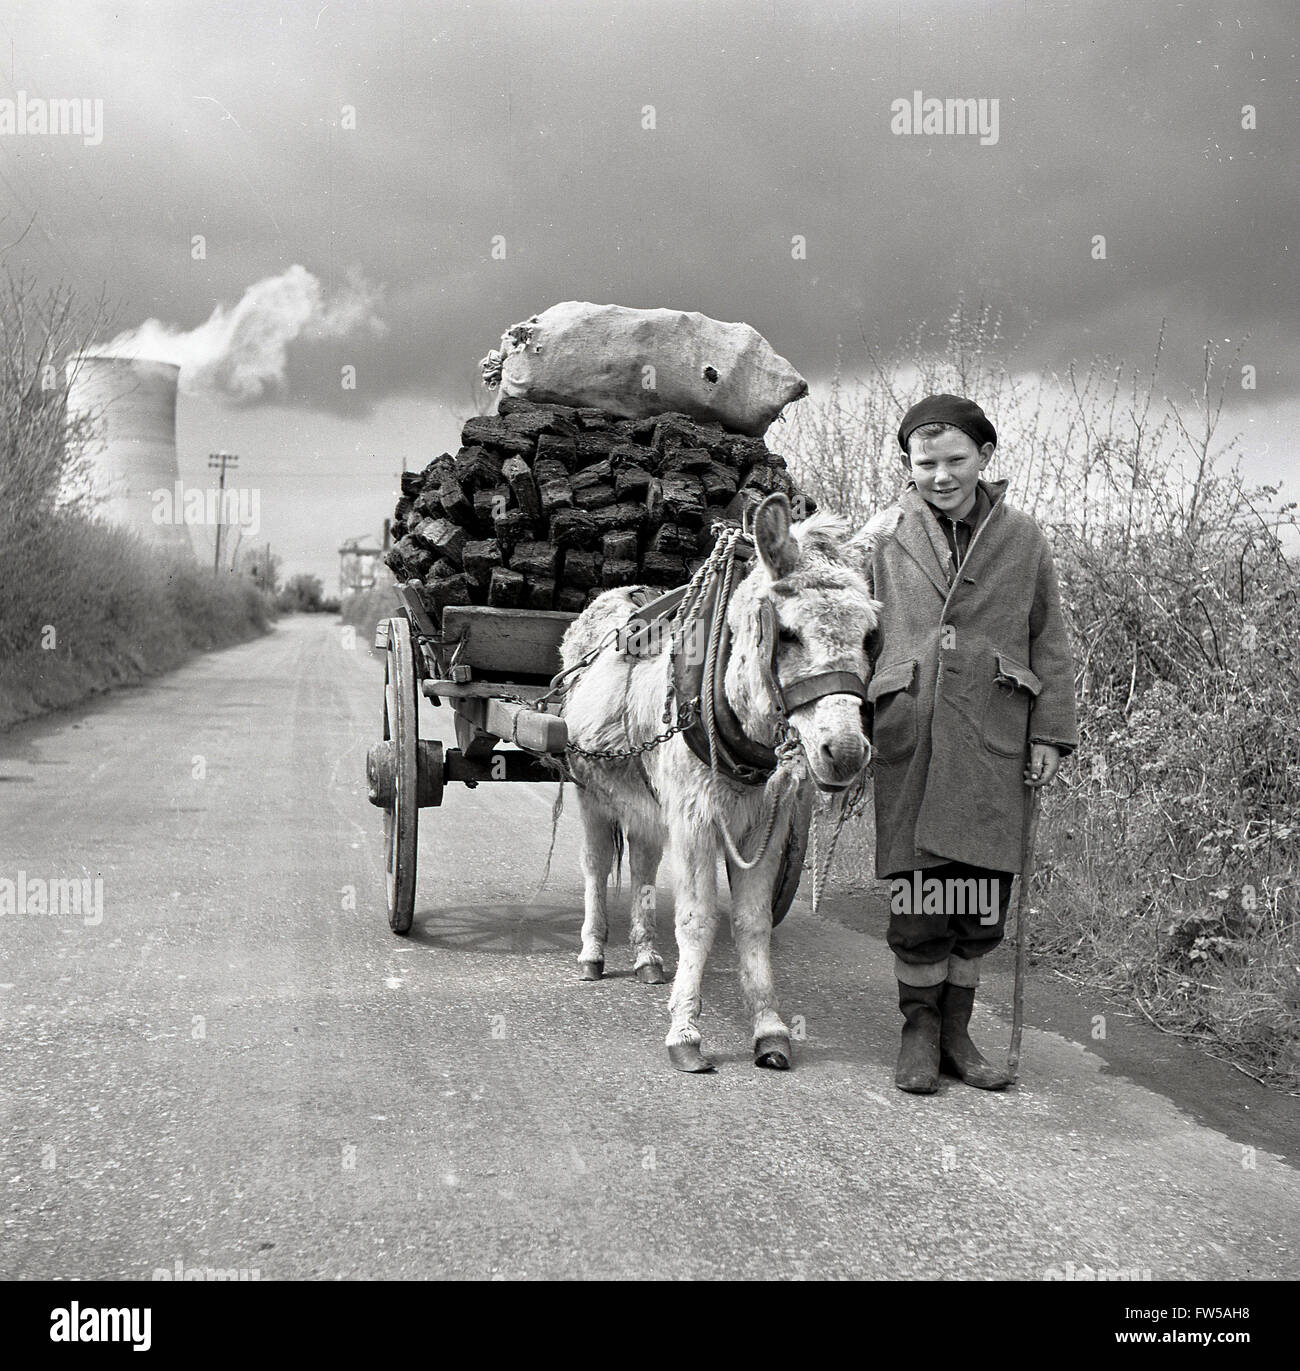 1950s, historical picture by J Allan Cash, of a young Irish lad with a pony and cart loaded with peat on a country lane in the rural west of Ireland. Peat or turf has been harvested from the the bogs in Ireland for centuries to be used as fuel for winter heating. Stock Photo